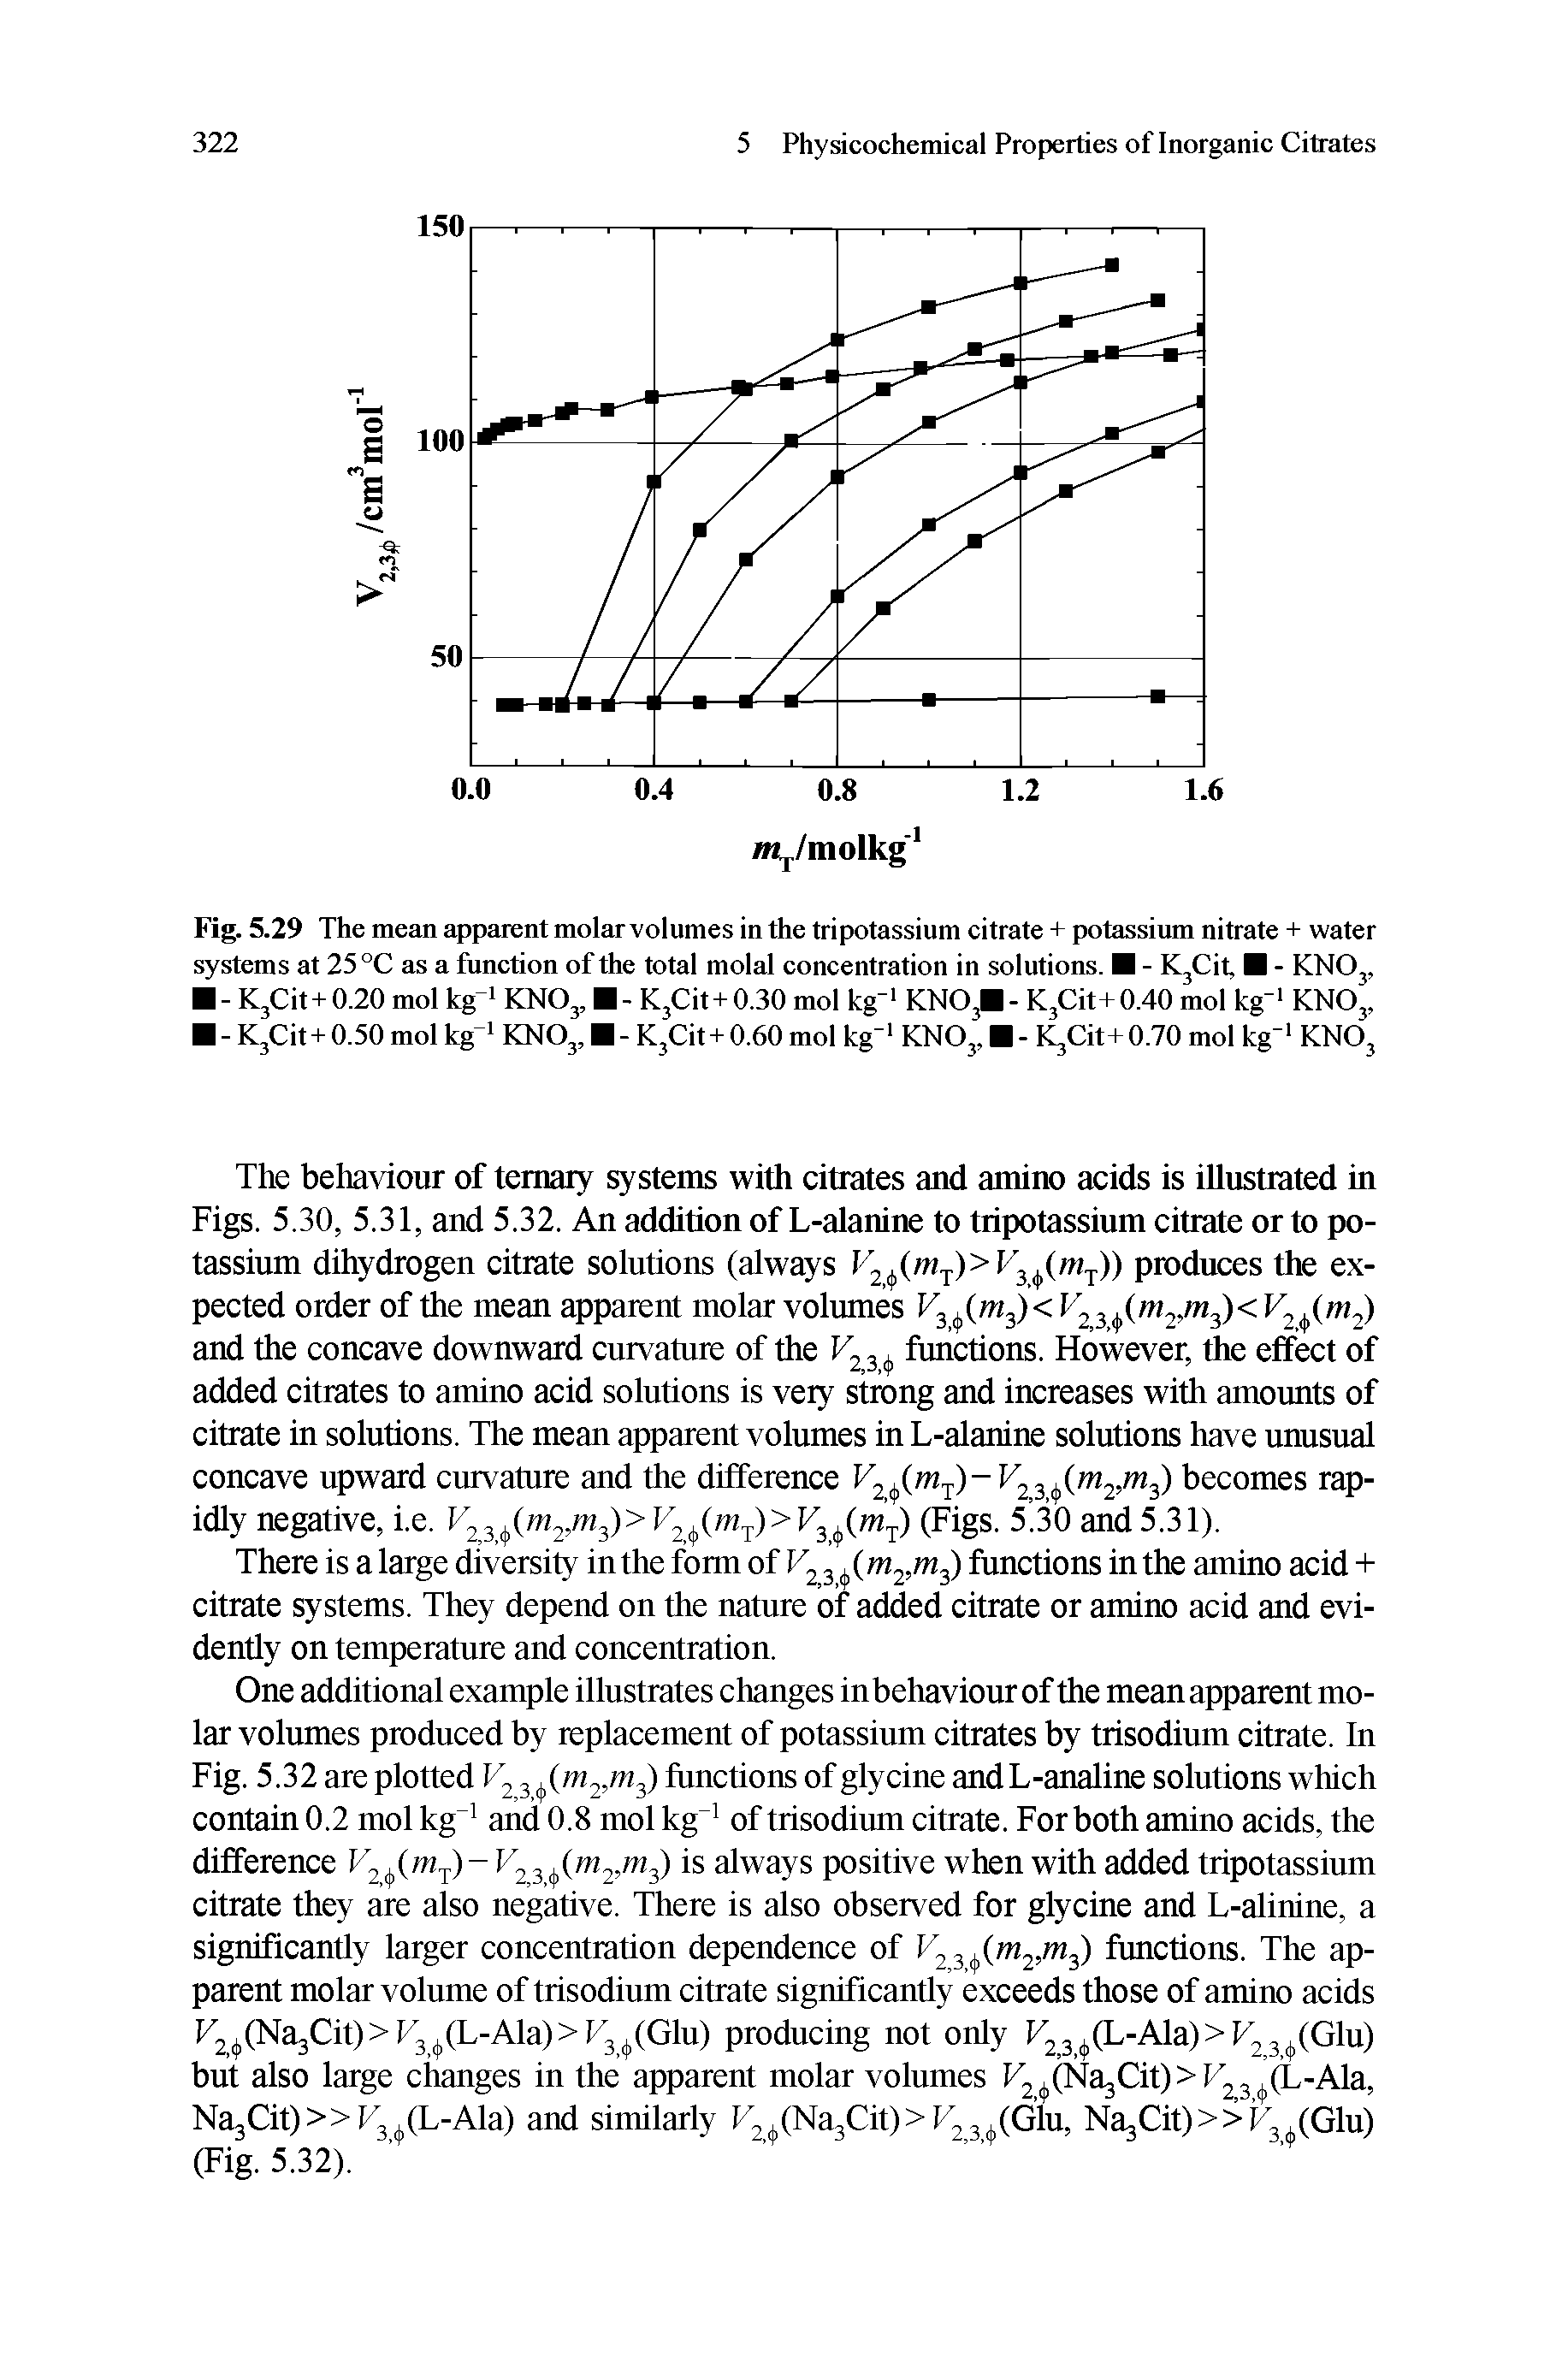 Fig. 5.29 The mean apparent molar volumes in the tripotassium citrate + potassium nitrate + water systems at 25°C as a function of the total molal concentration in solutions. - K3Cit, - KNOj,...